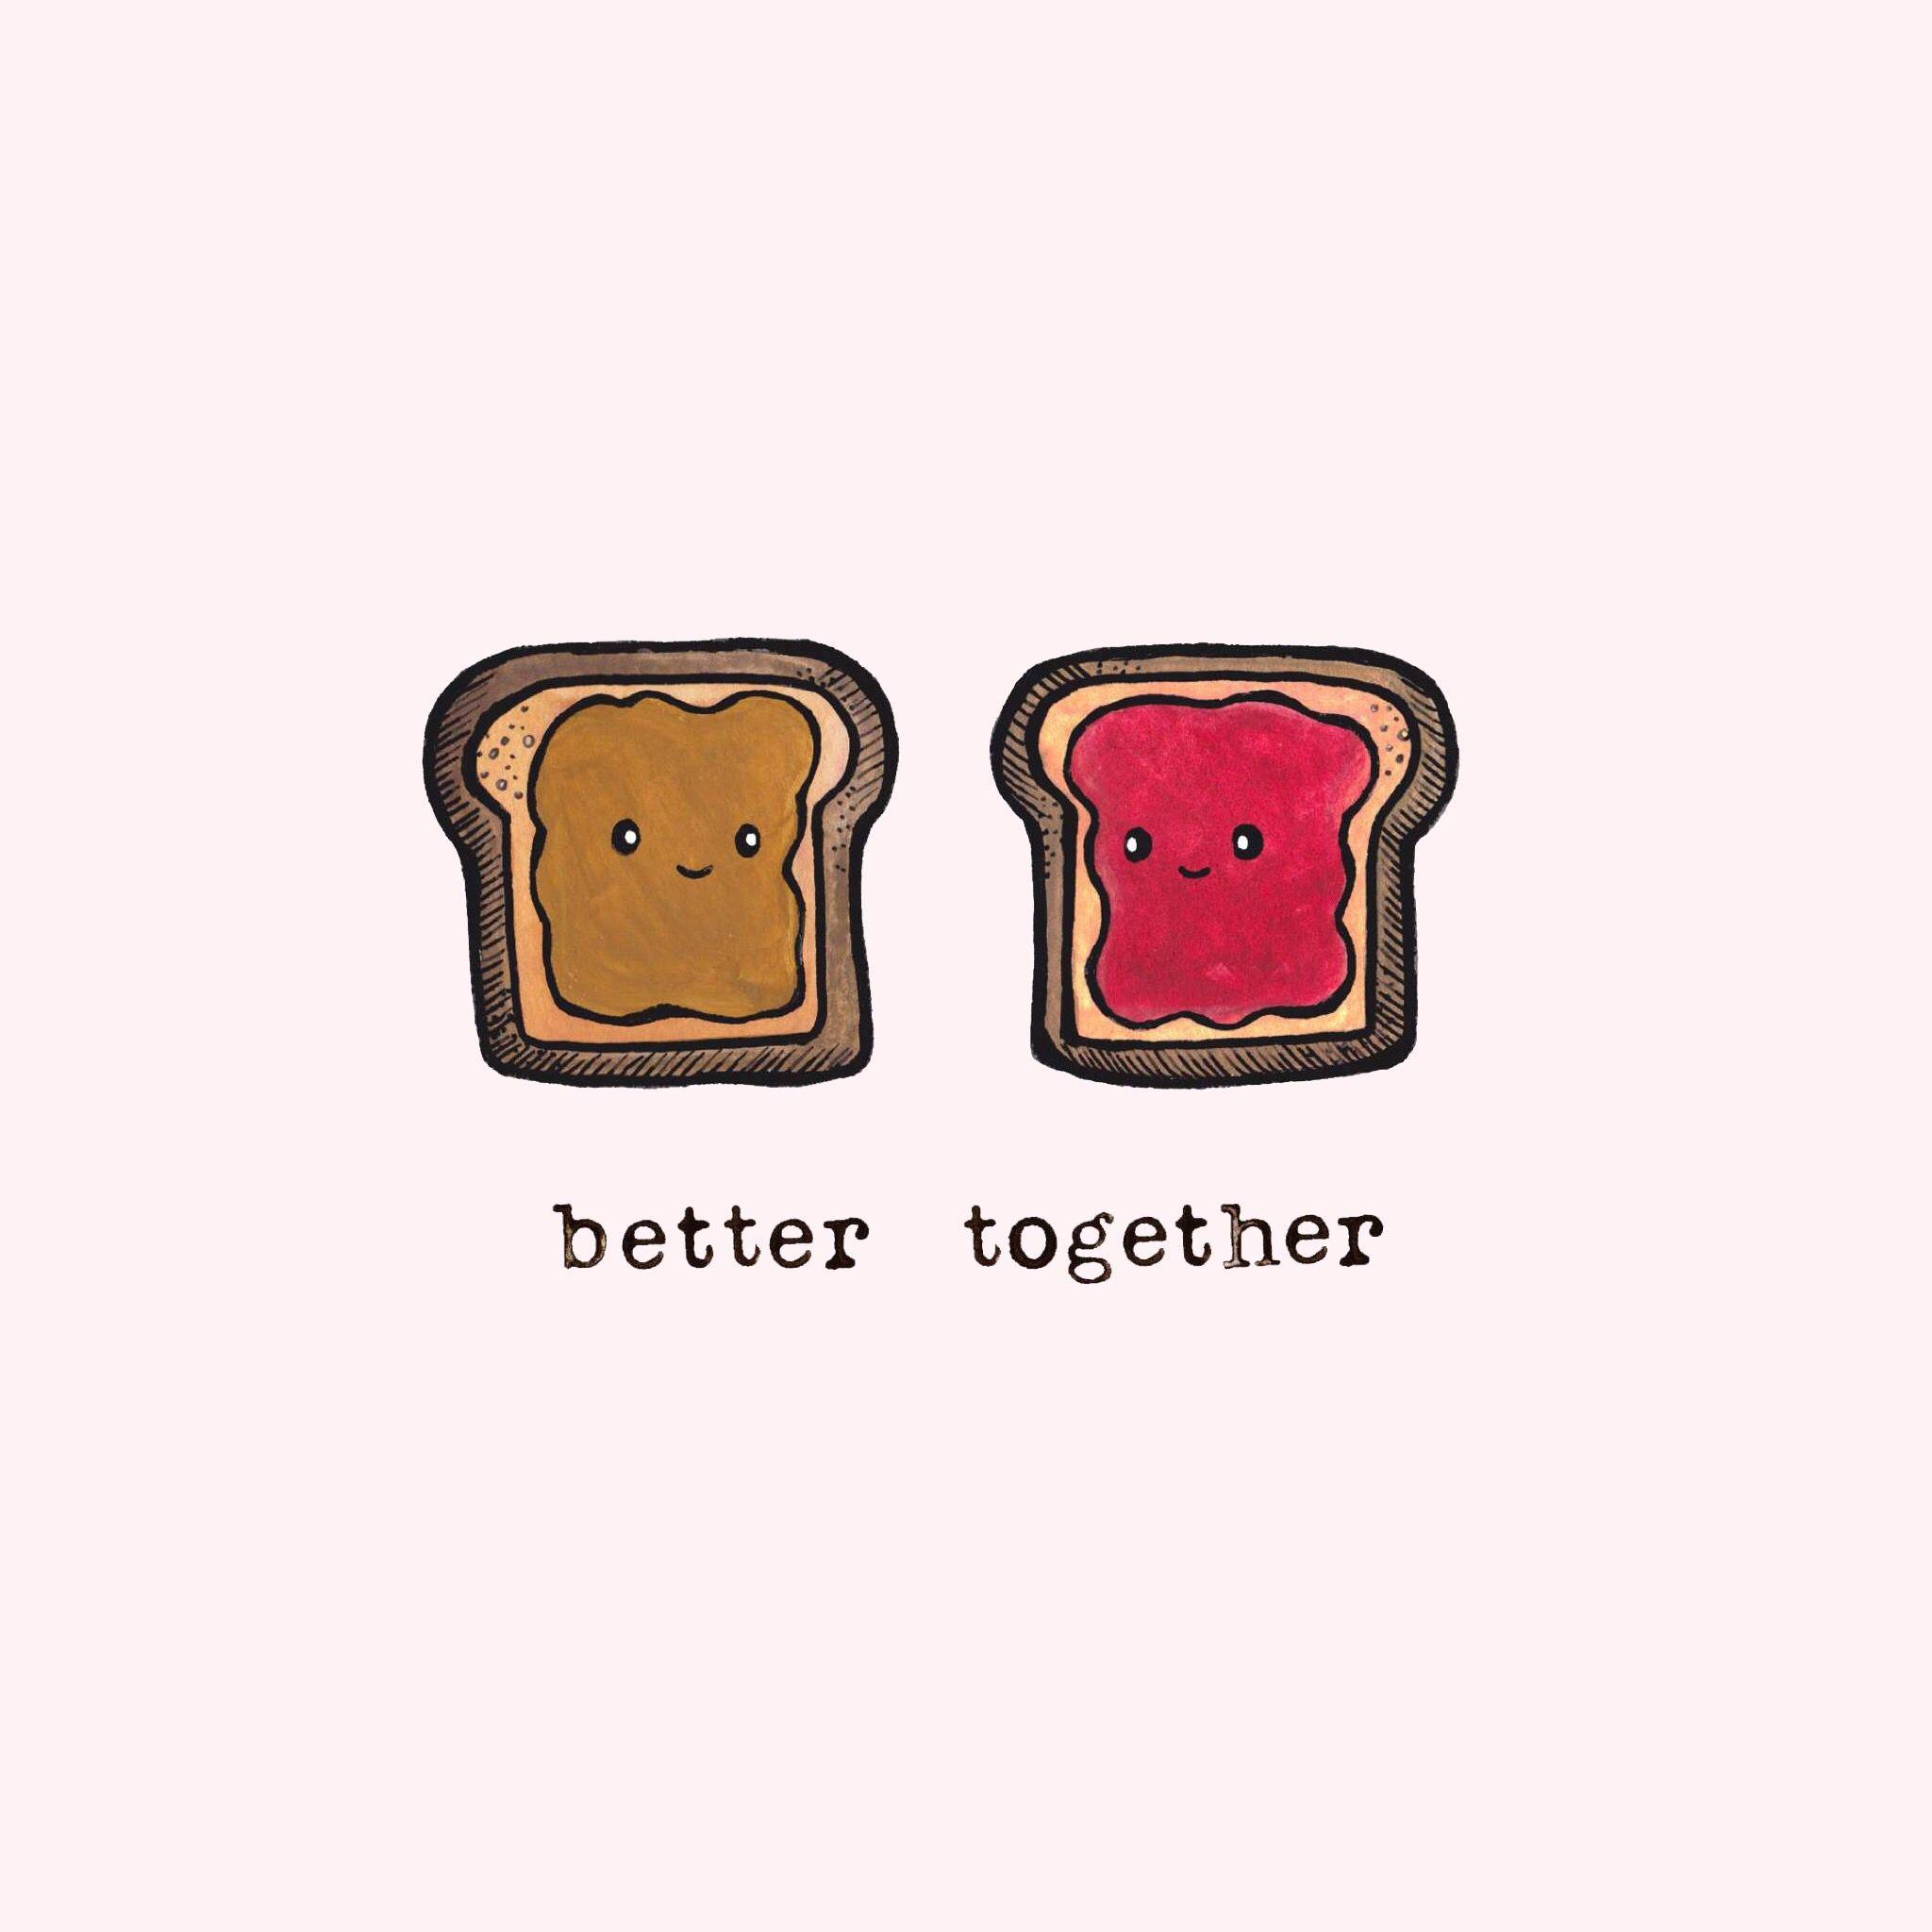 better together butter + jelly. Better together, Cute drawings, Cute wallpaper